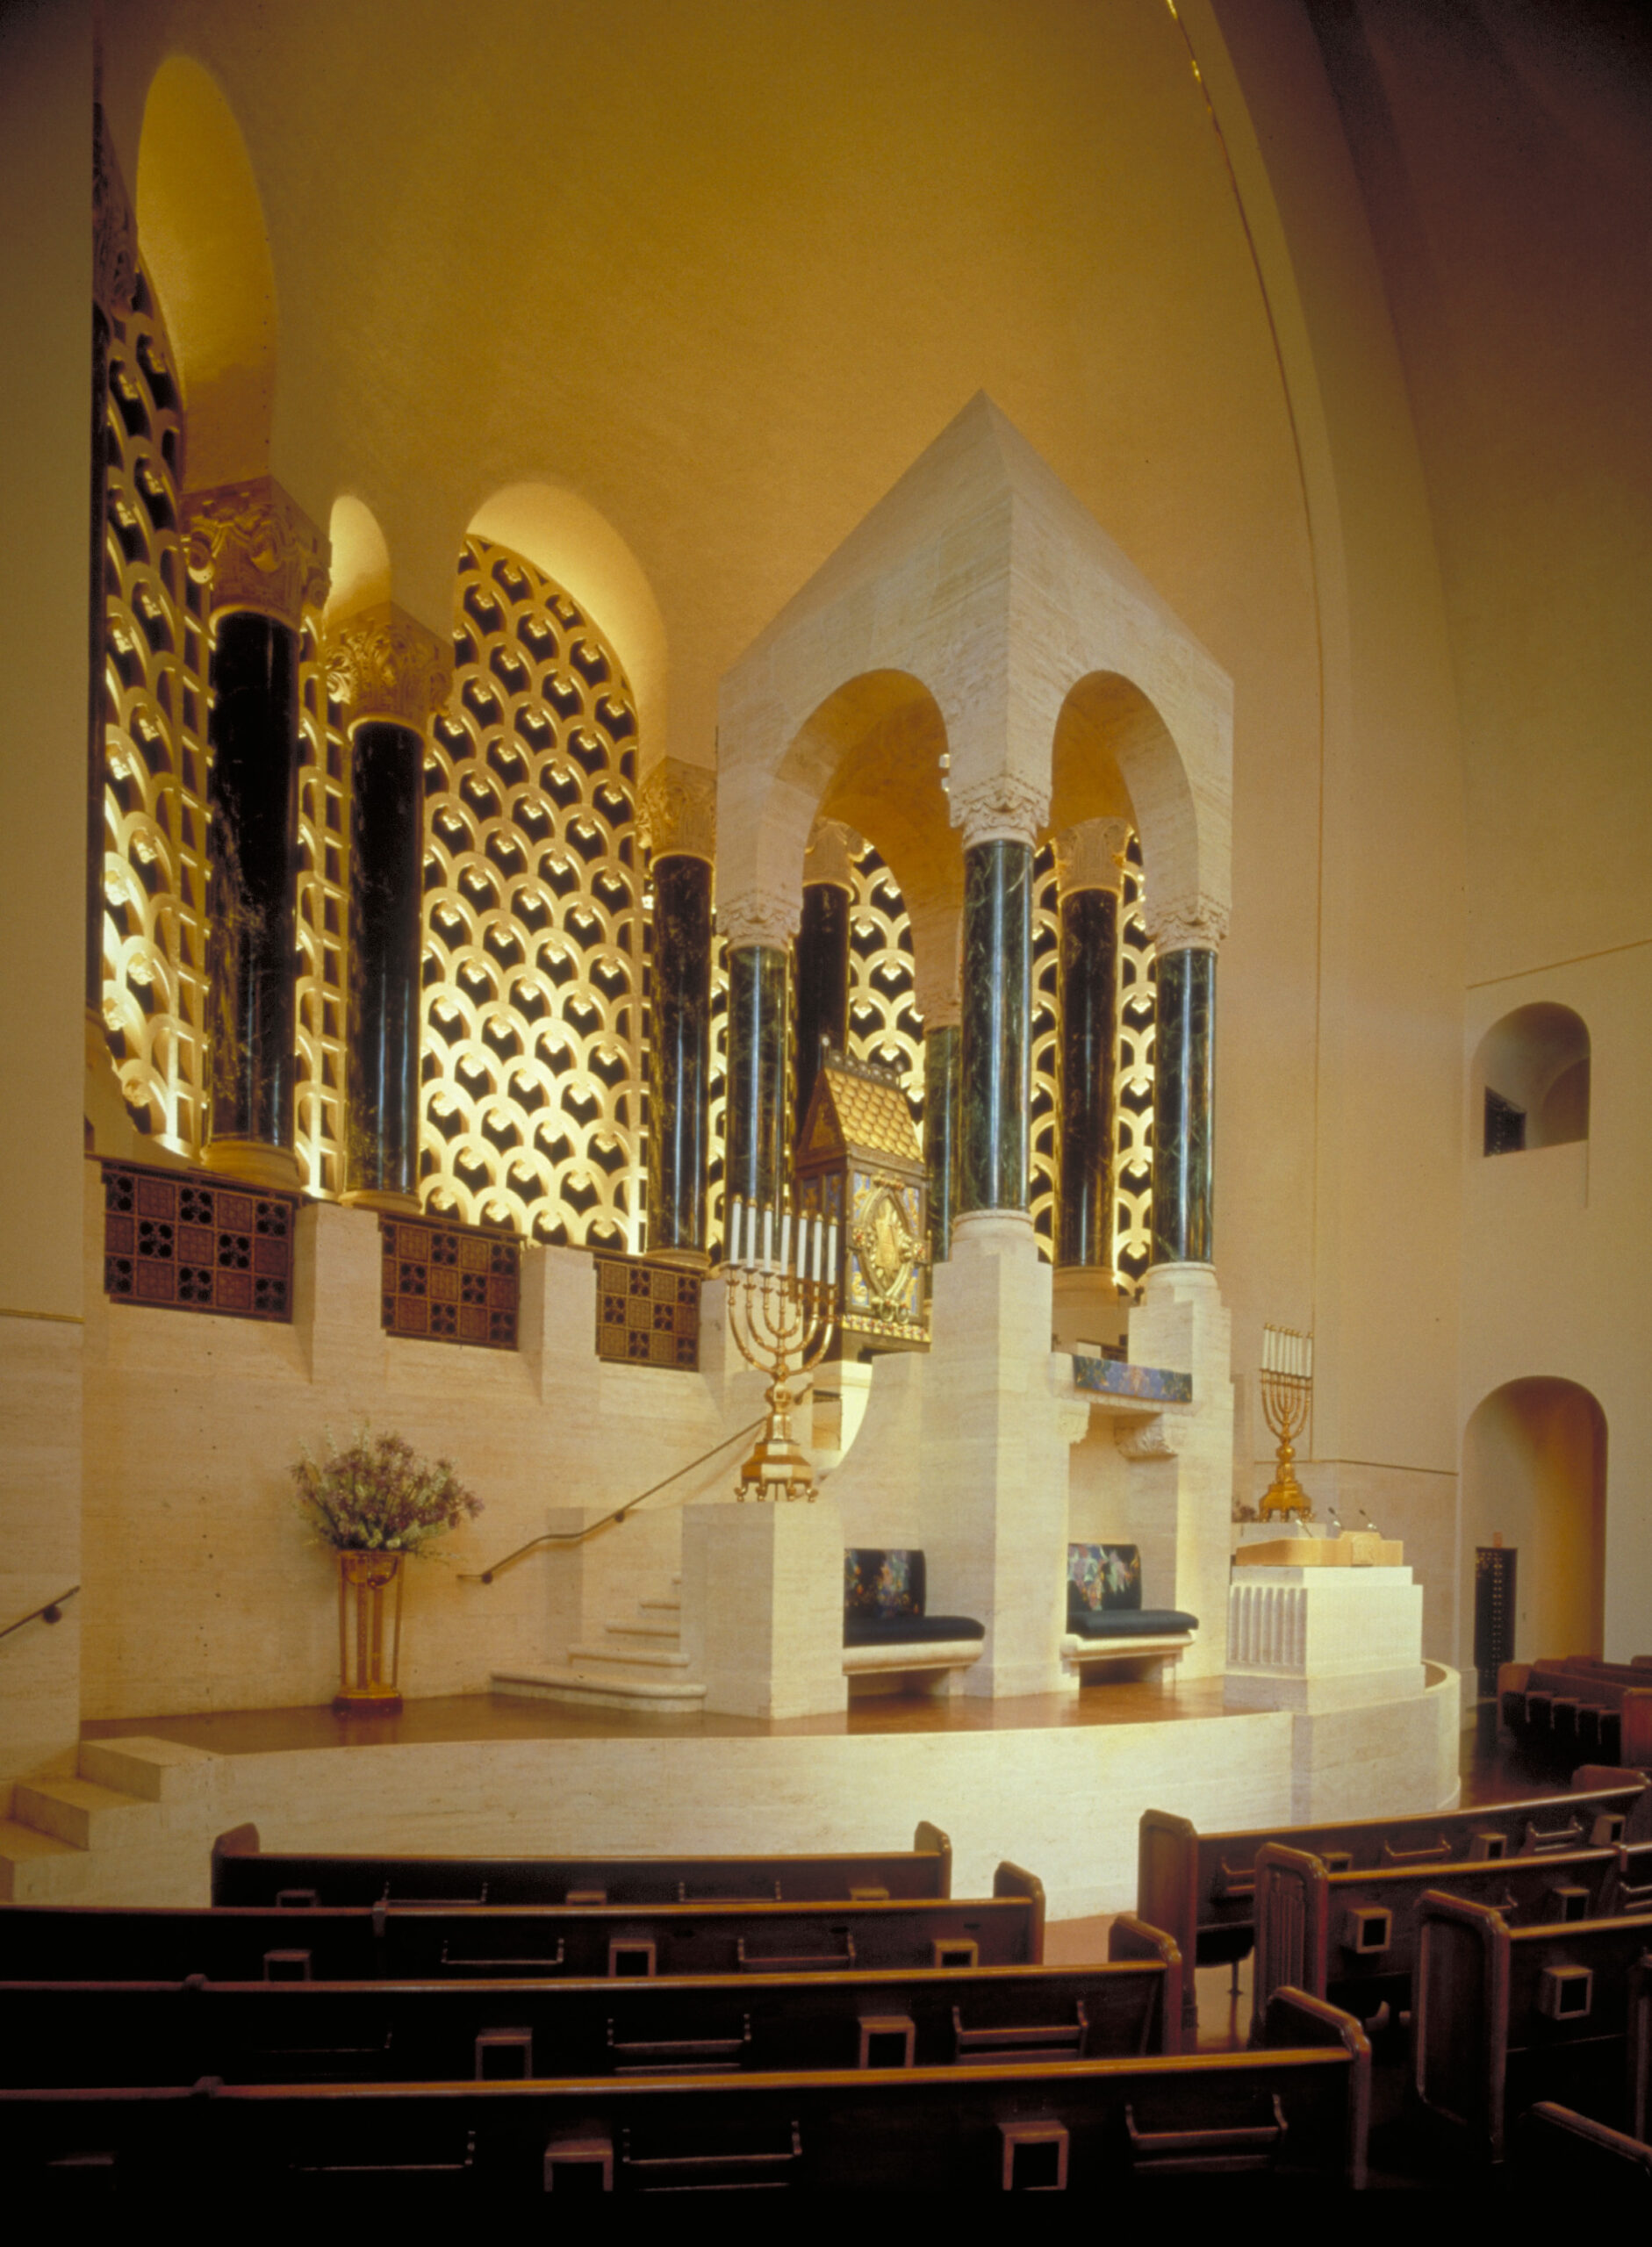 Downlight is concealed in the bimah to light the arc, and concealed uplight washes the decorative grill. Temple Emanu-El, San Francisco, California © Chas McGrath